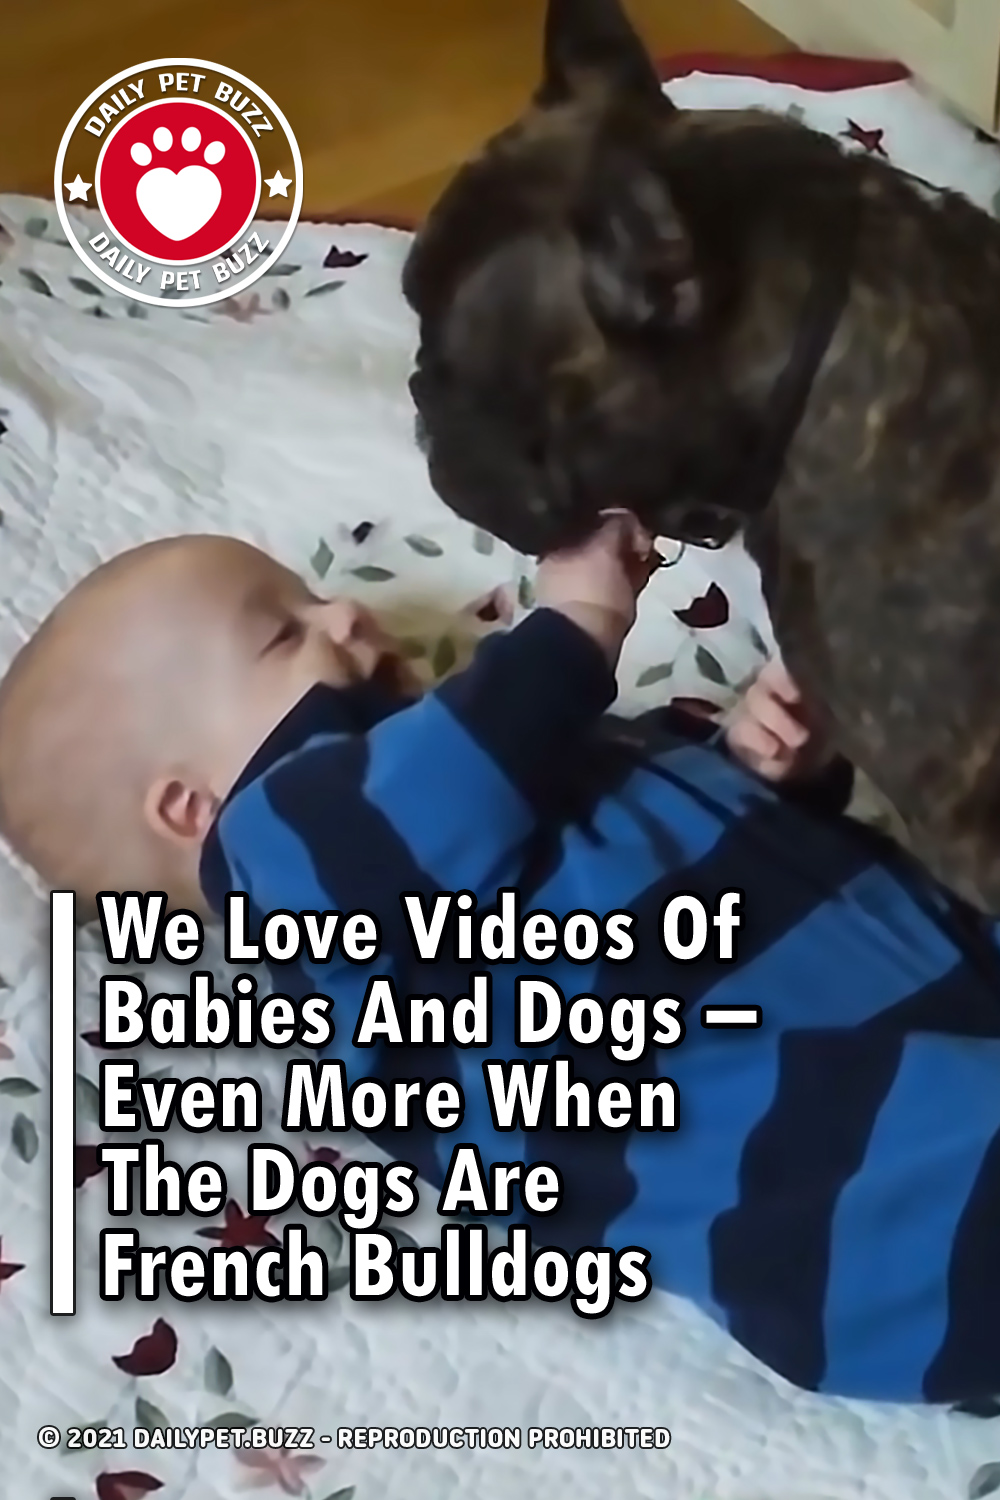 We Love Videos Of Babies And Dogs – Even More When The Dogs Are French Bulldogs